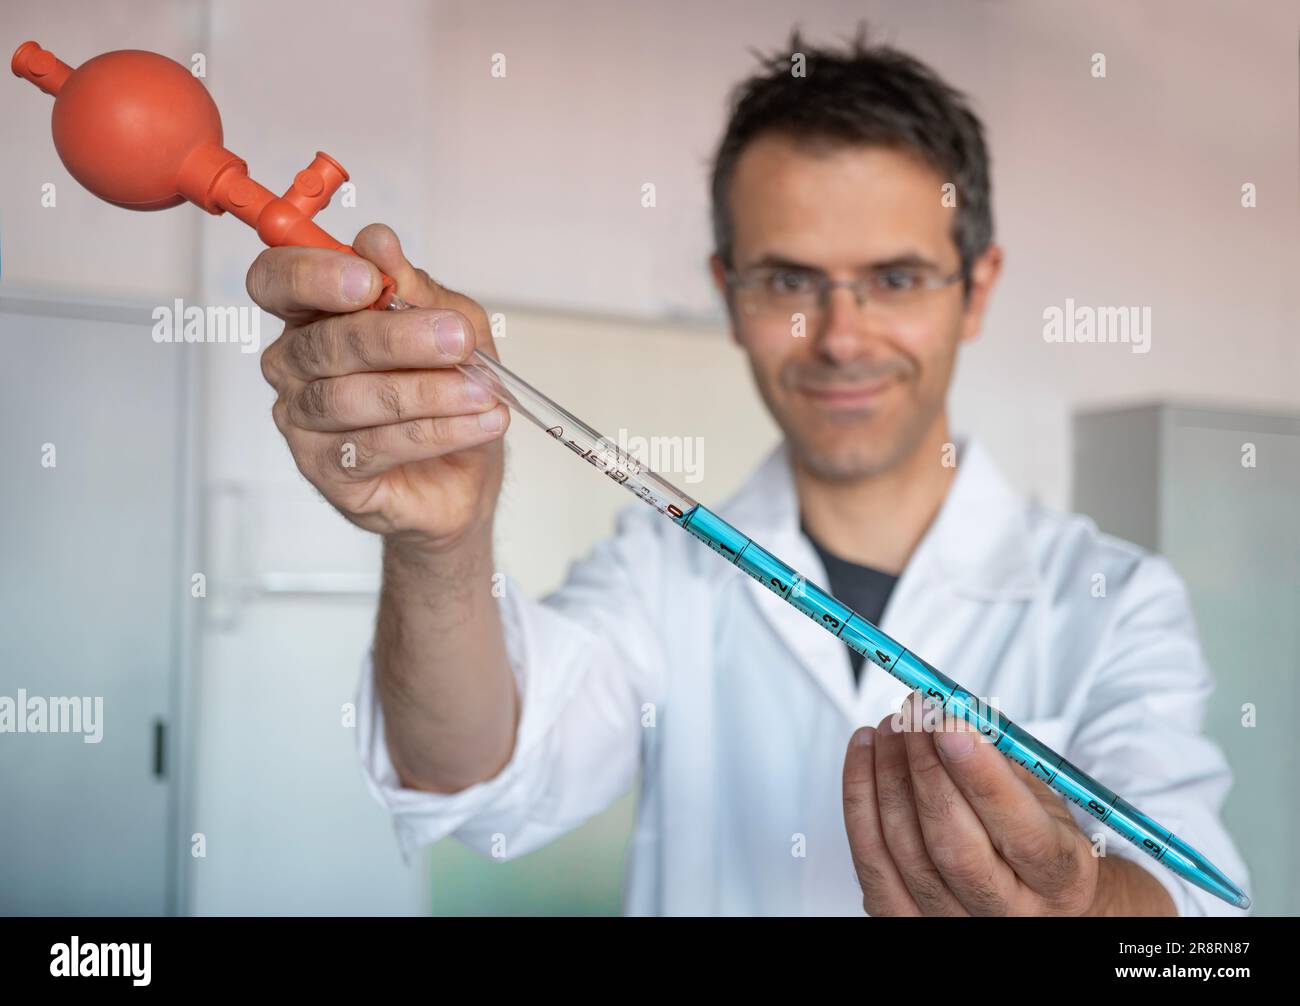 Pipette with Peleus ball into chemistry lab. Also called propipet. Chemical scientist in the background Stock Photo